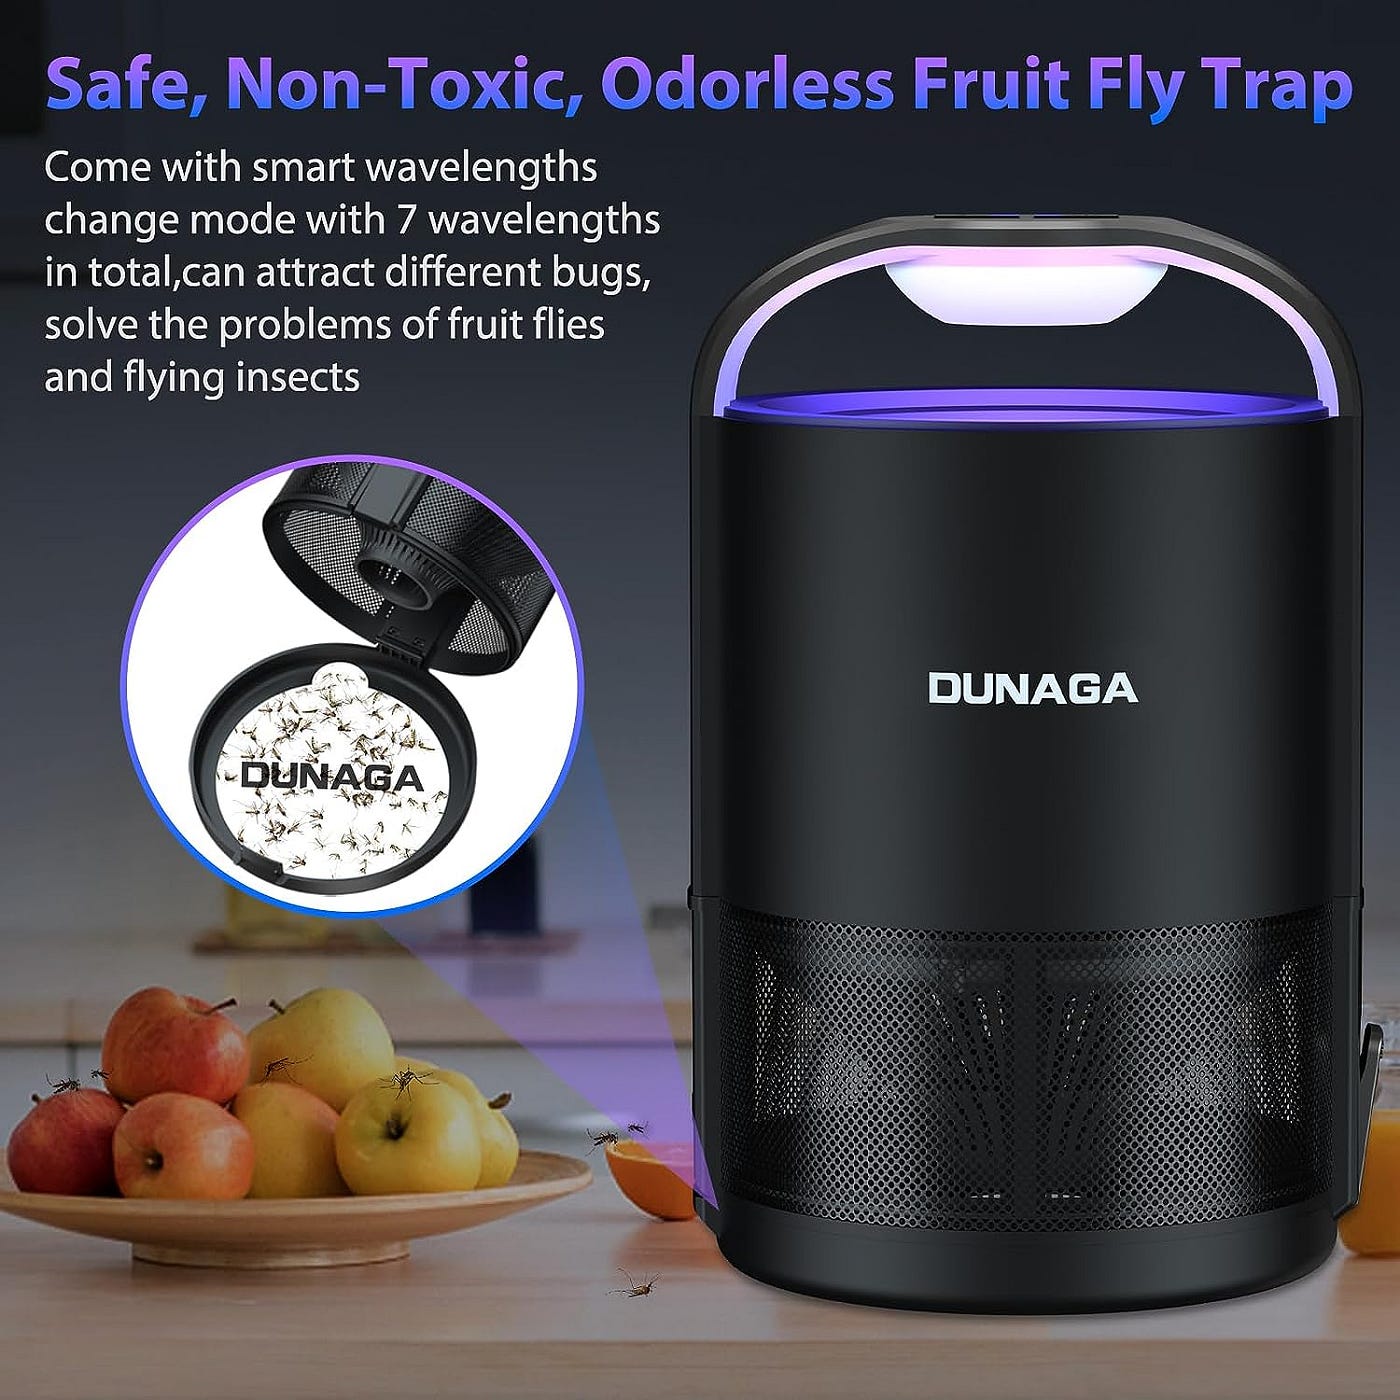 Say Goodbye to Pesky Fruit Flies with the Automatic Fruit Fly Trap